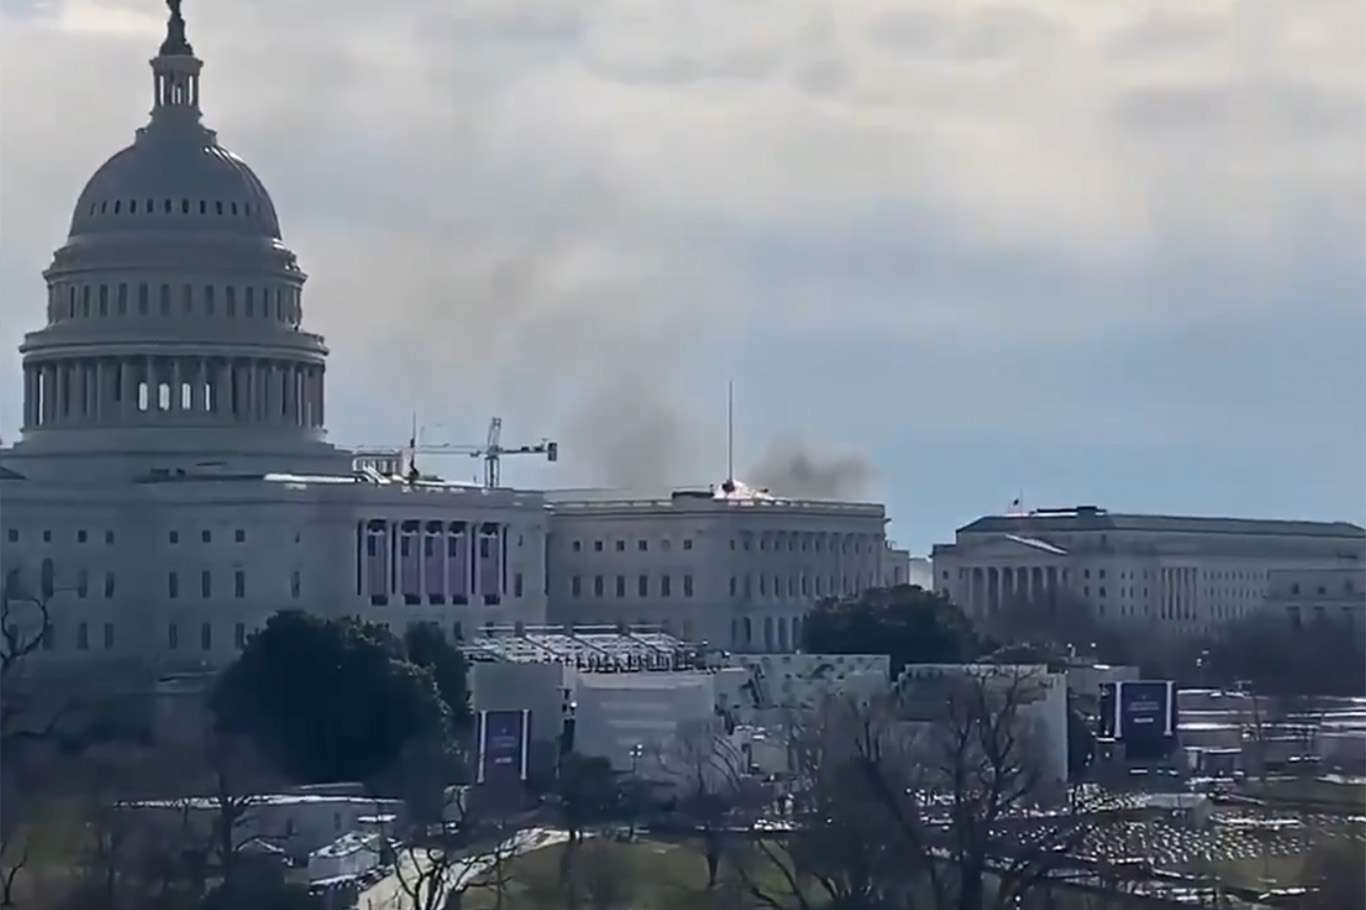 U.S. Capitol shut down temporarily due to a fire nearby